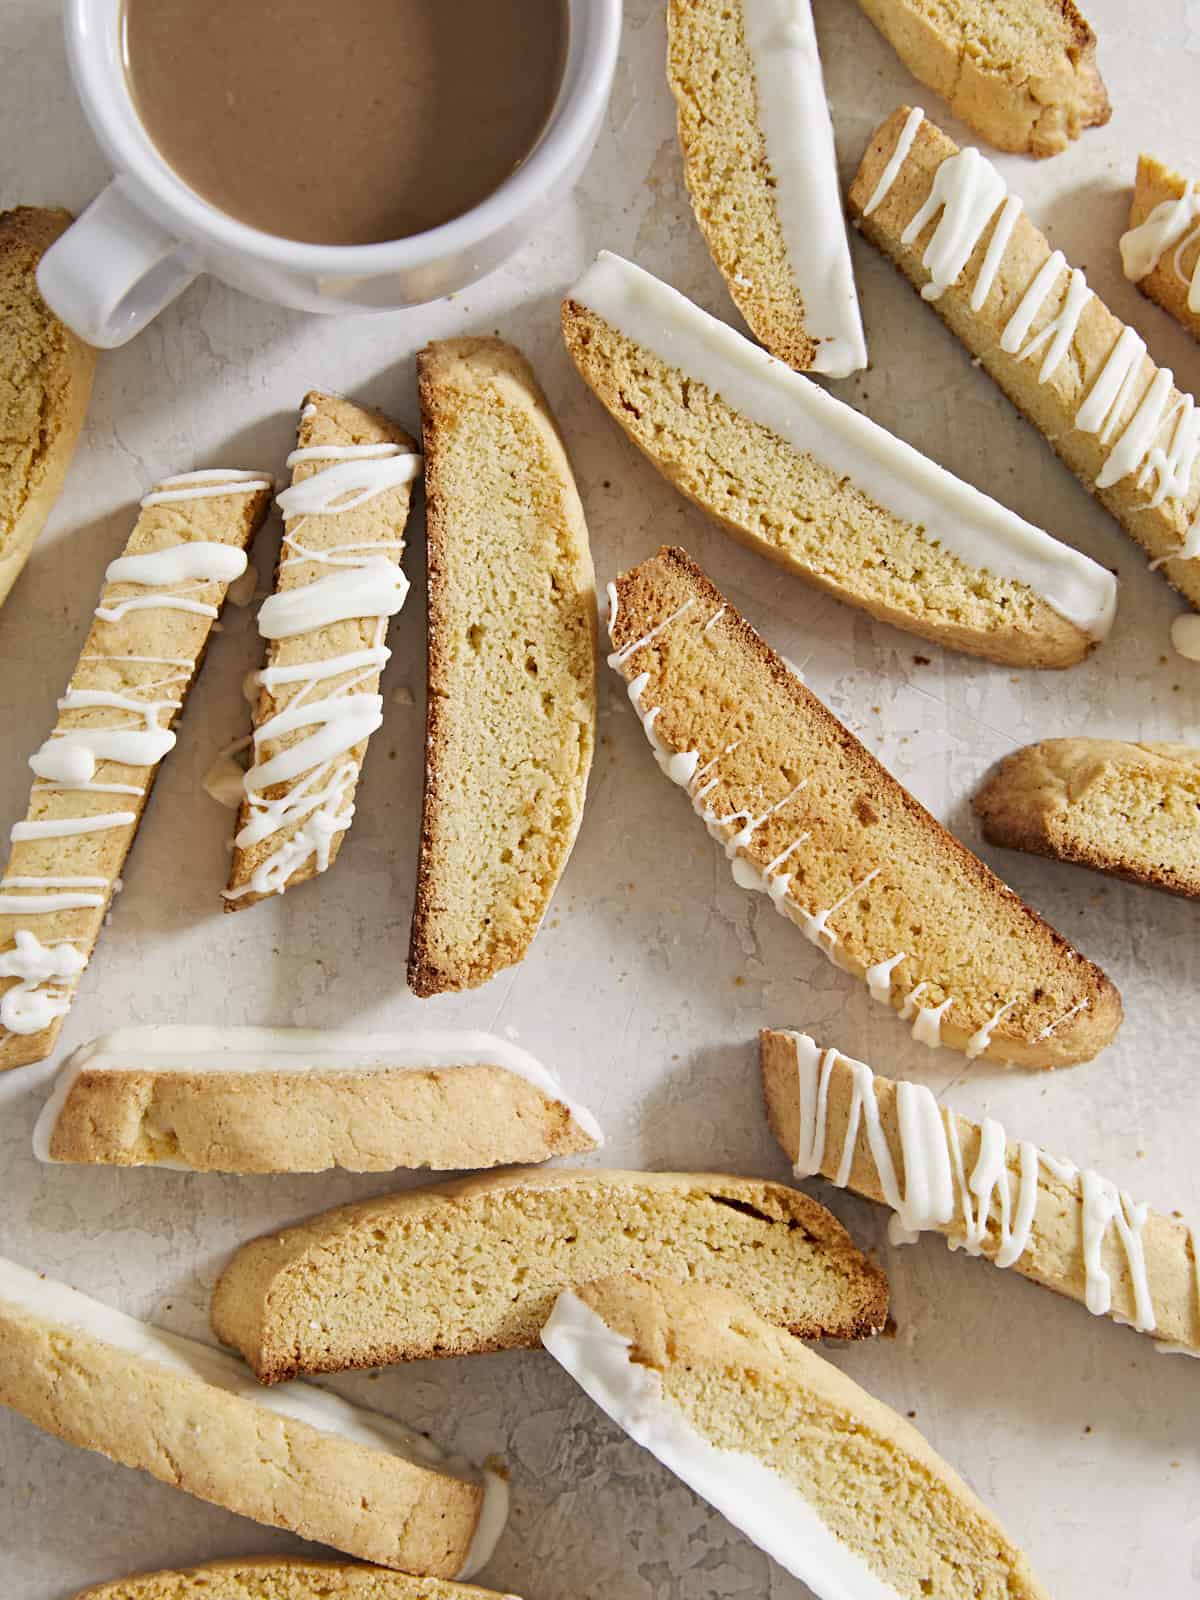 Scattered biscotti on a surface with a cup of coffee.